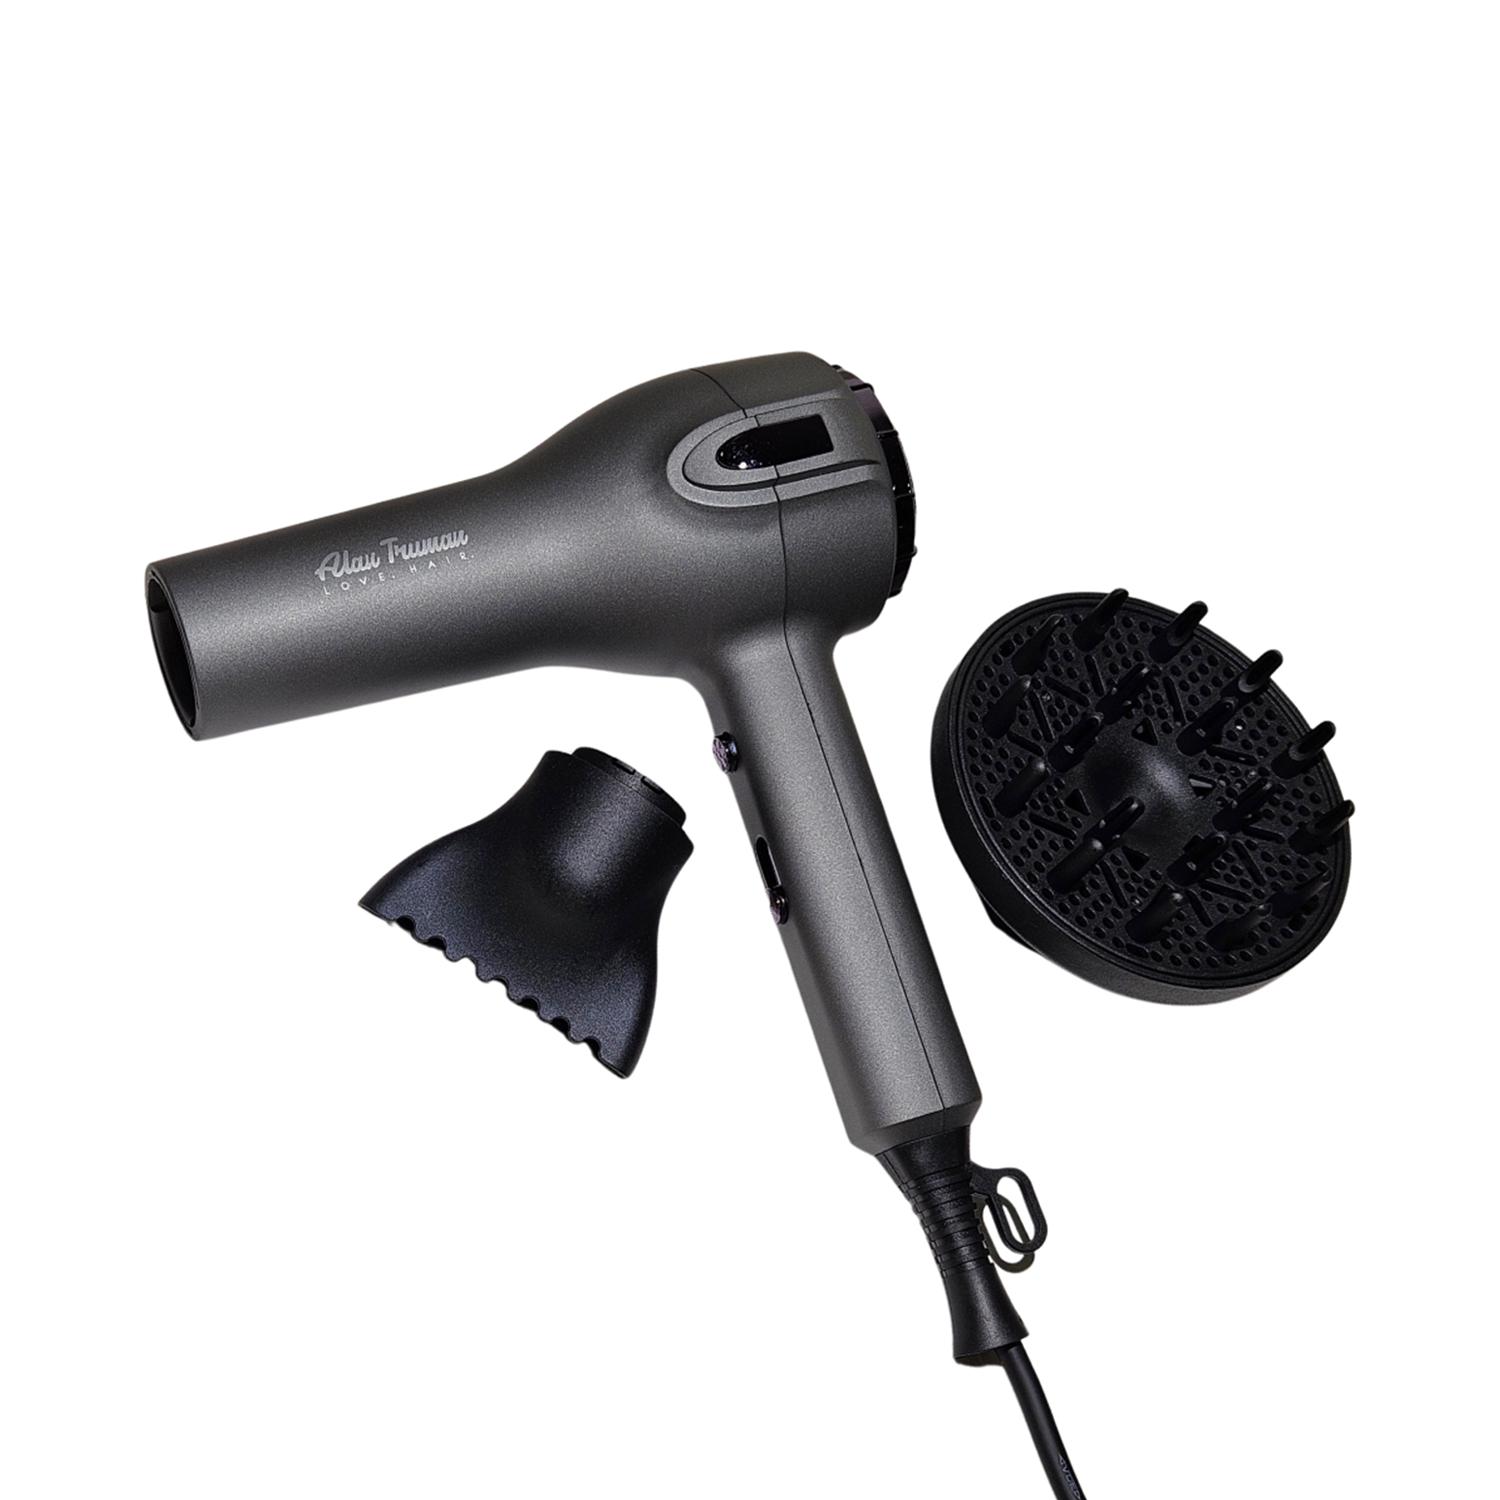 Alan Truman Force 7799 - 2200W Super Powerful Ac Motor Hair Dryer With Large Diffuser (1 Pc)